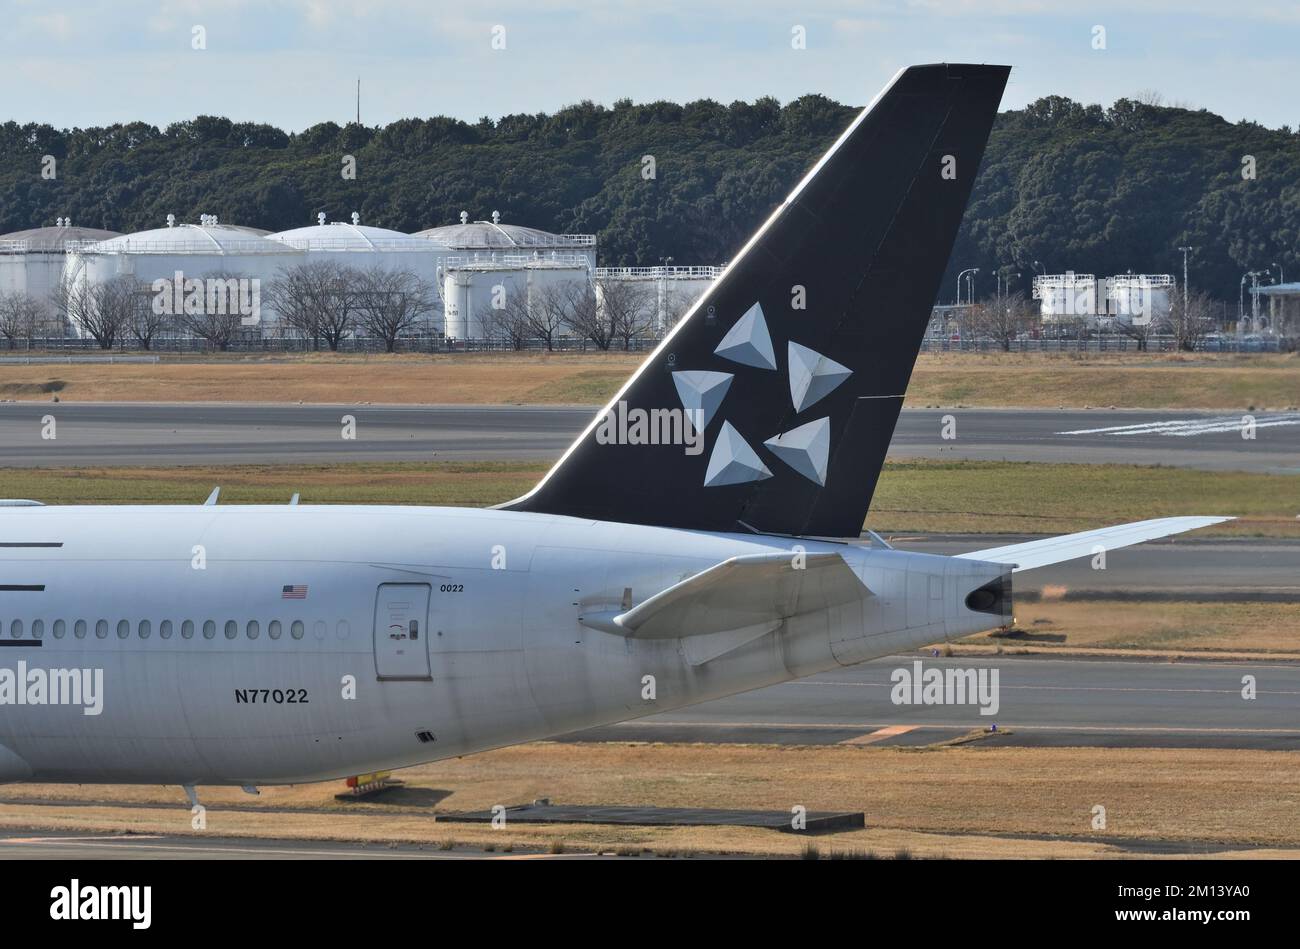 Chiba Prefecture, Japan - December 19, 2020: United Airlines Star Alliance livery Boeing B777-200ER (N77022) Vertical Fin. Stock Photo